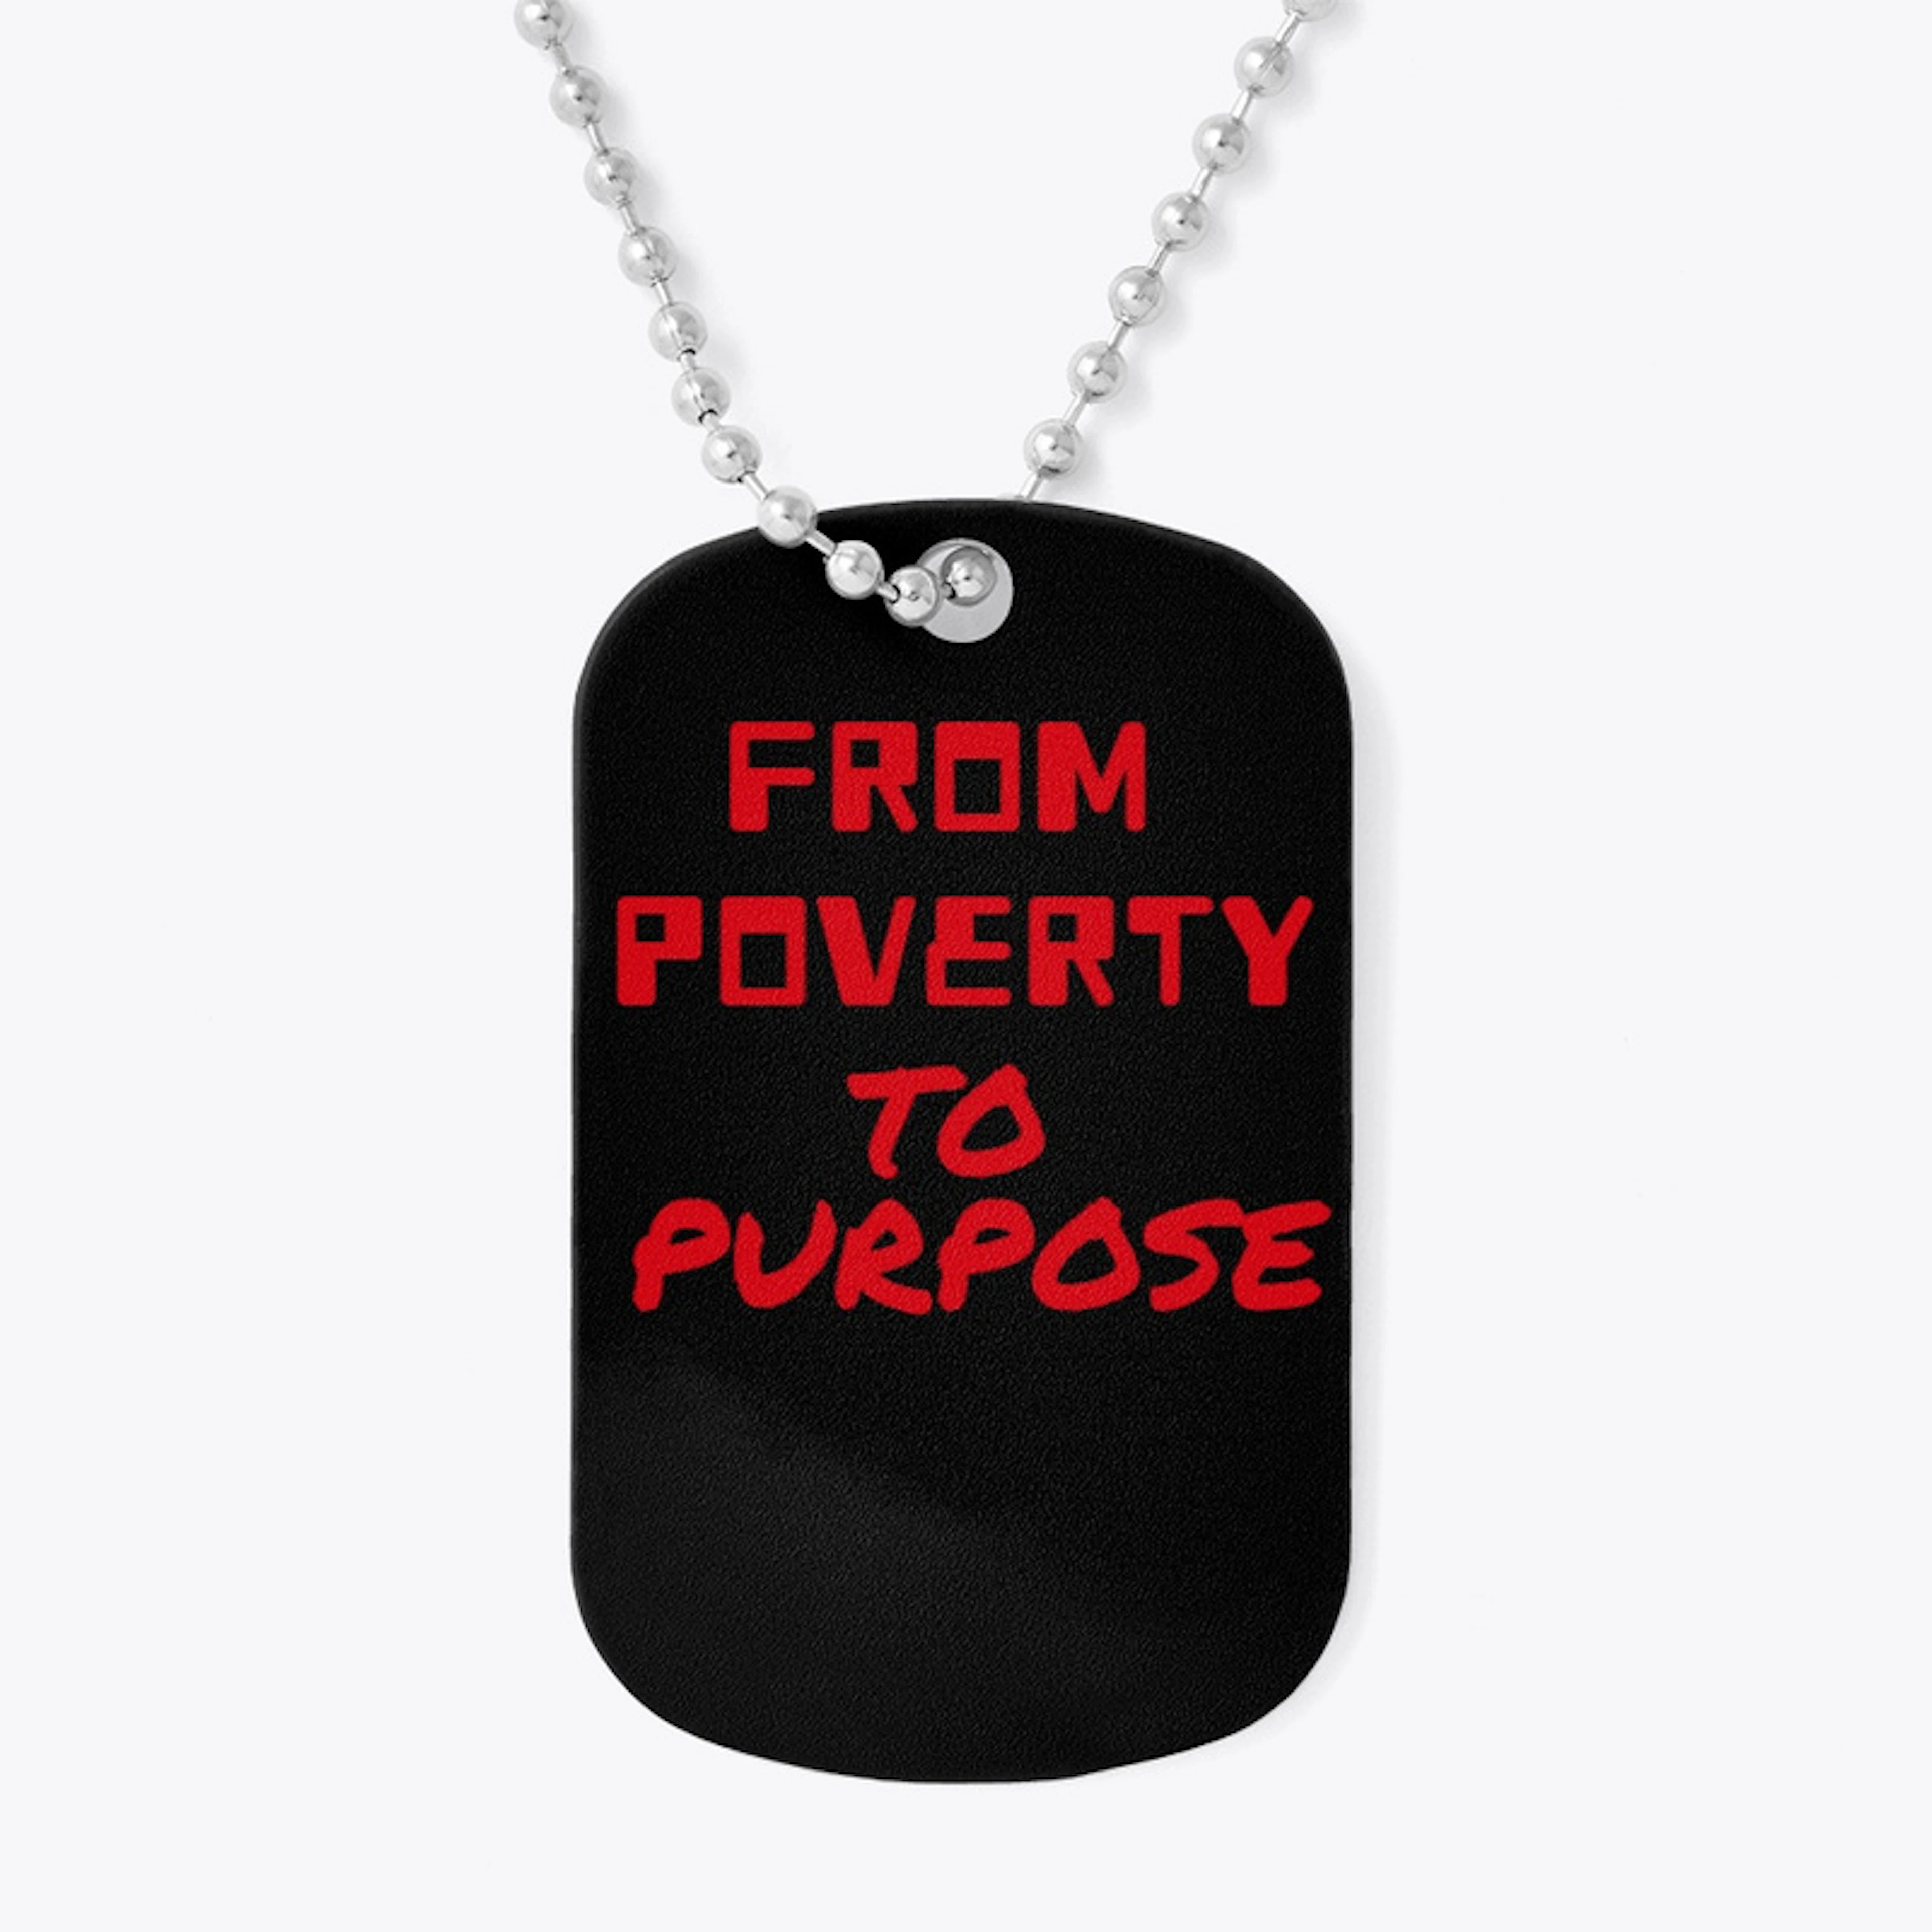 From Poverty to Purpose